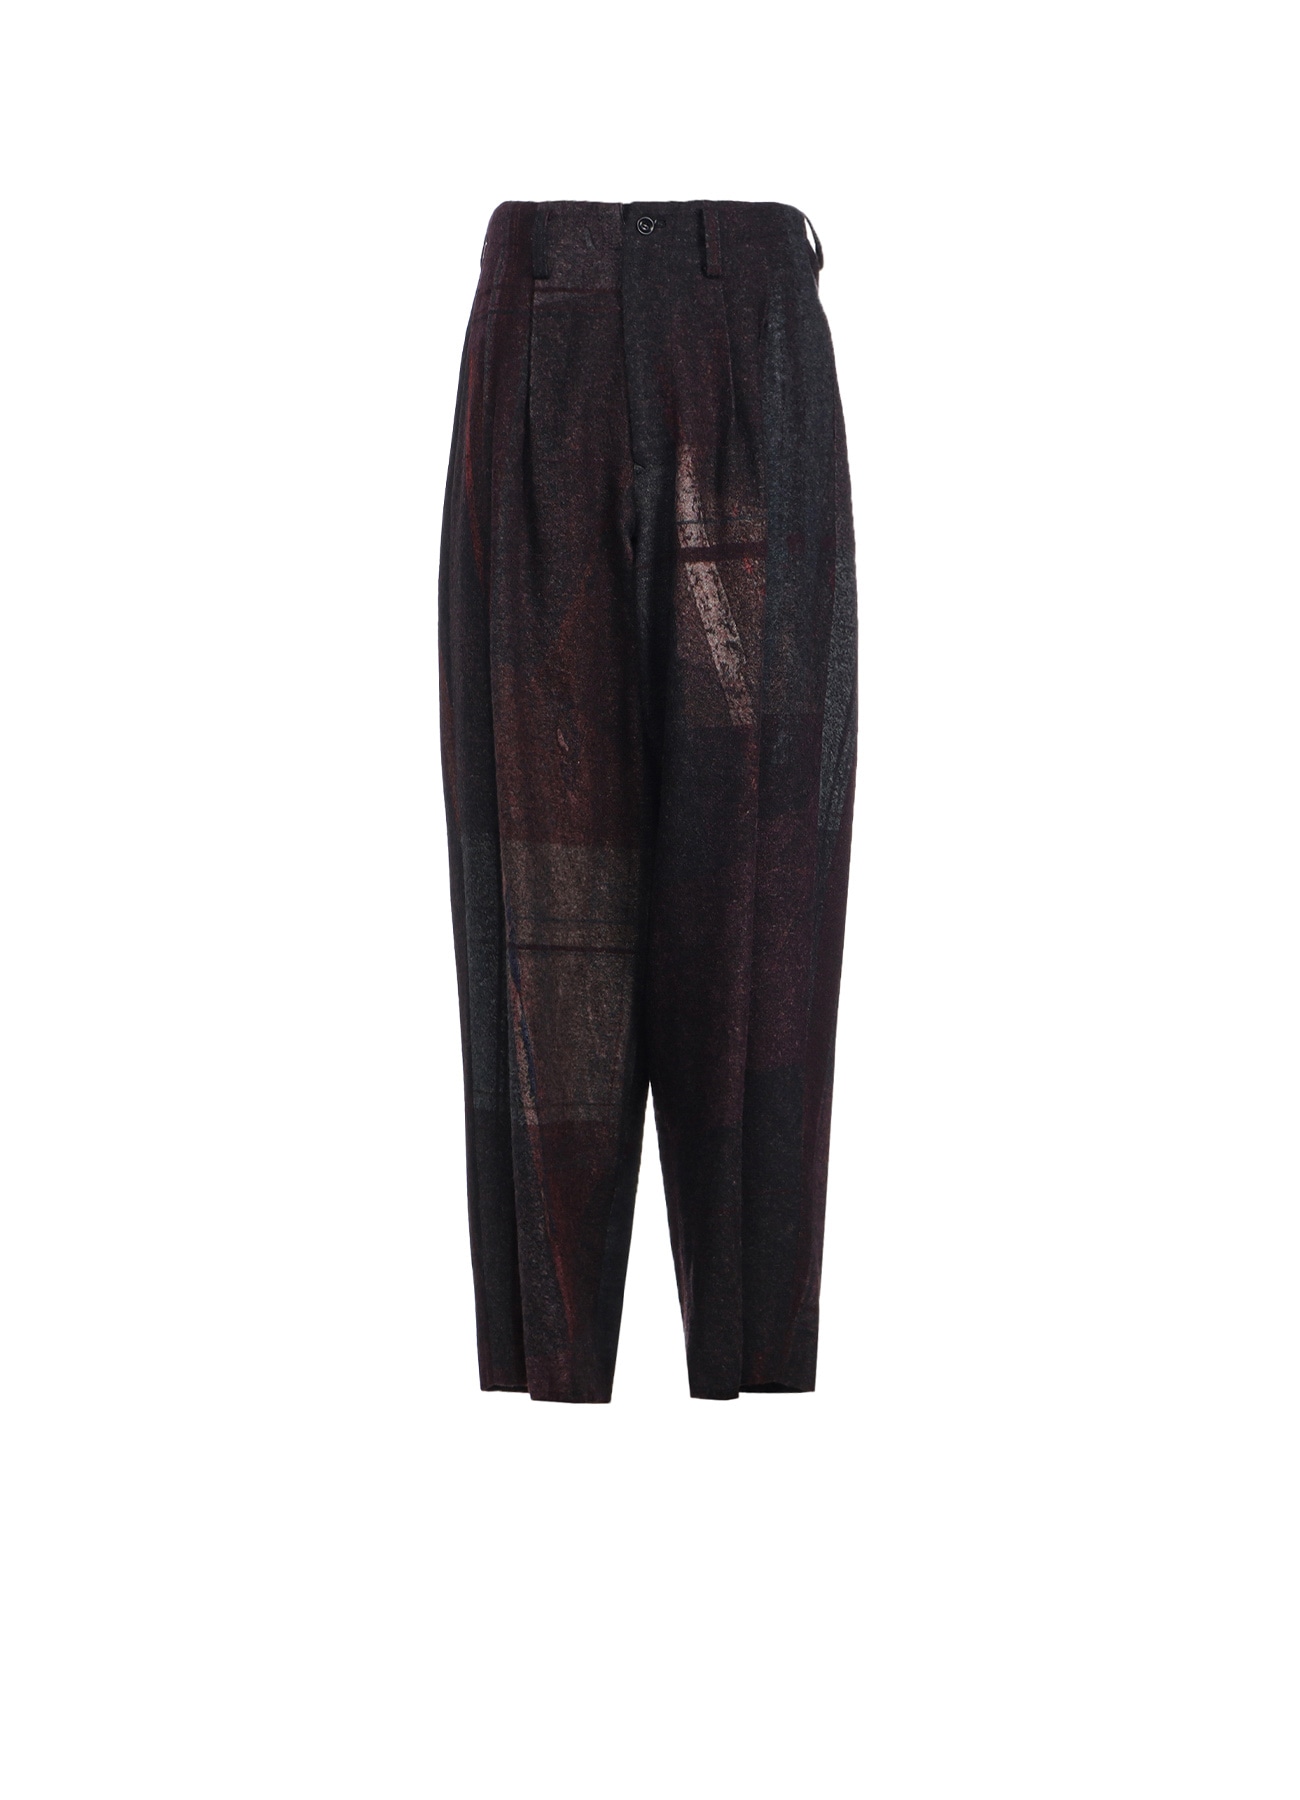 RAISED C/W TWILL PEALED CHECK PT DOUBLE TUCK WIDE PANTS